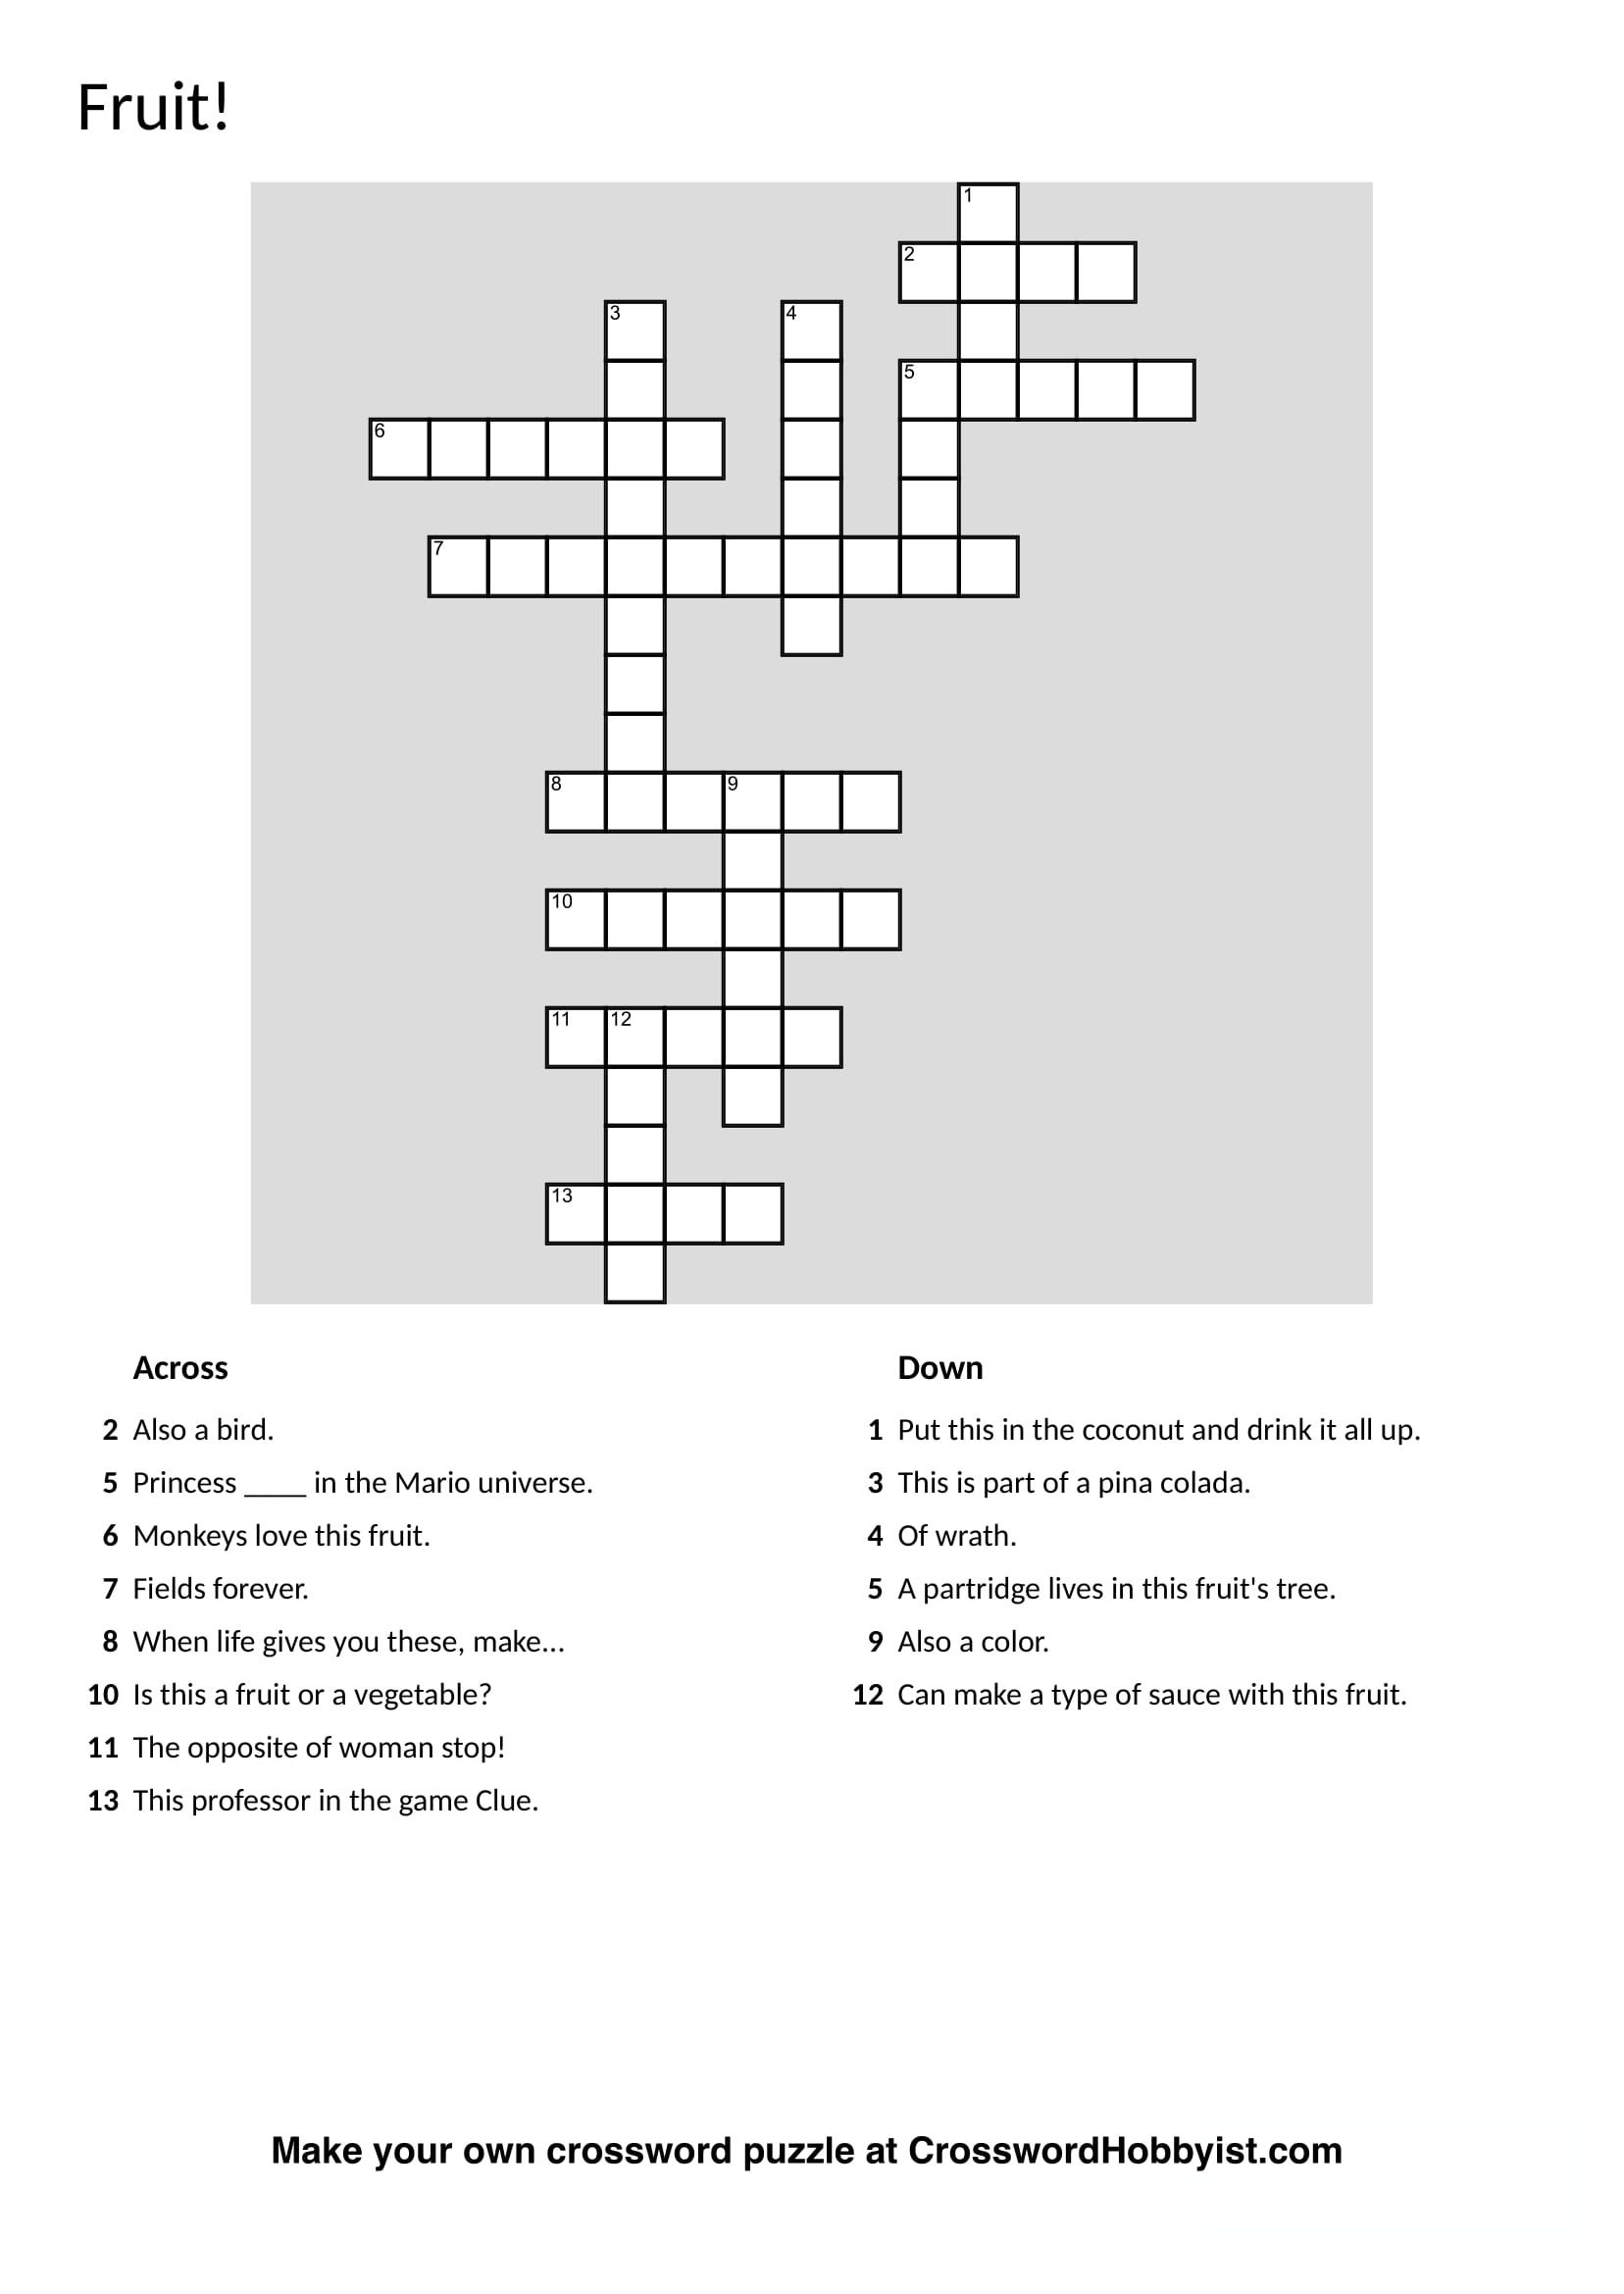 Make Your Own Crossword Free Printable